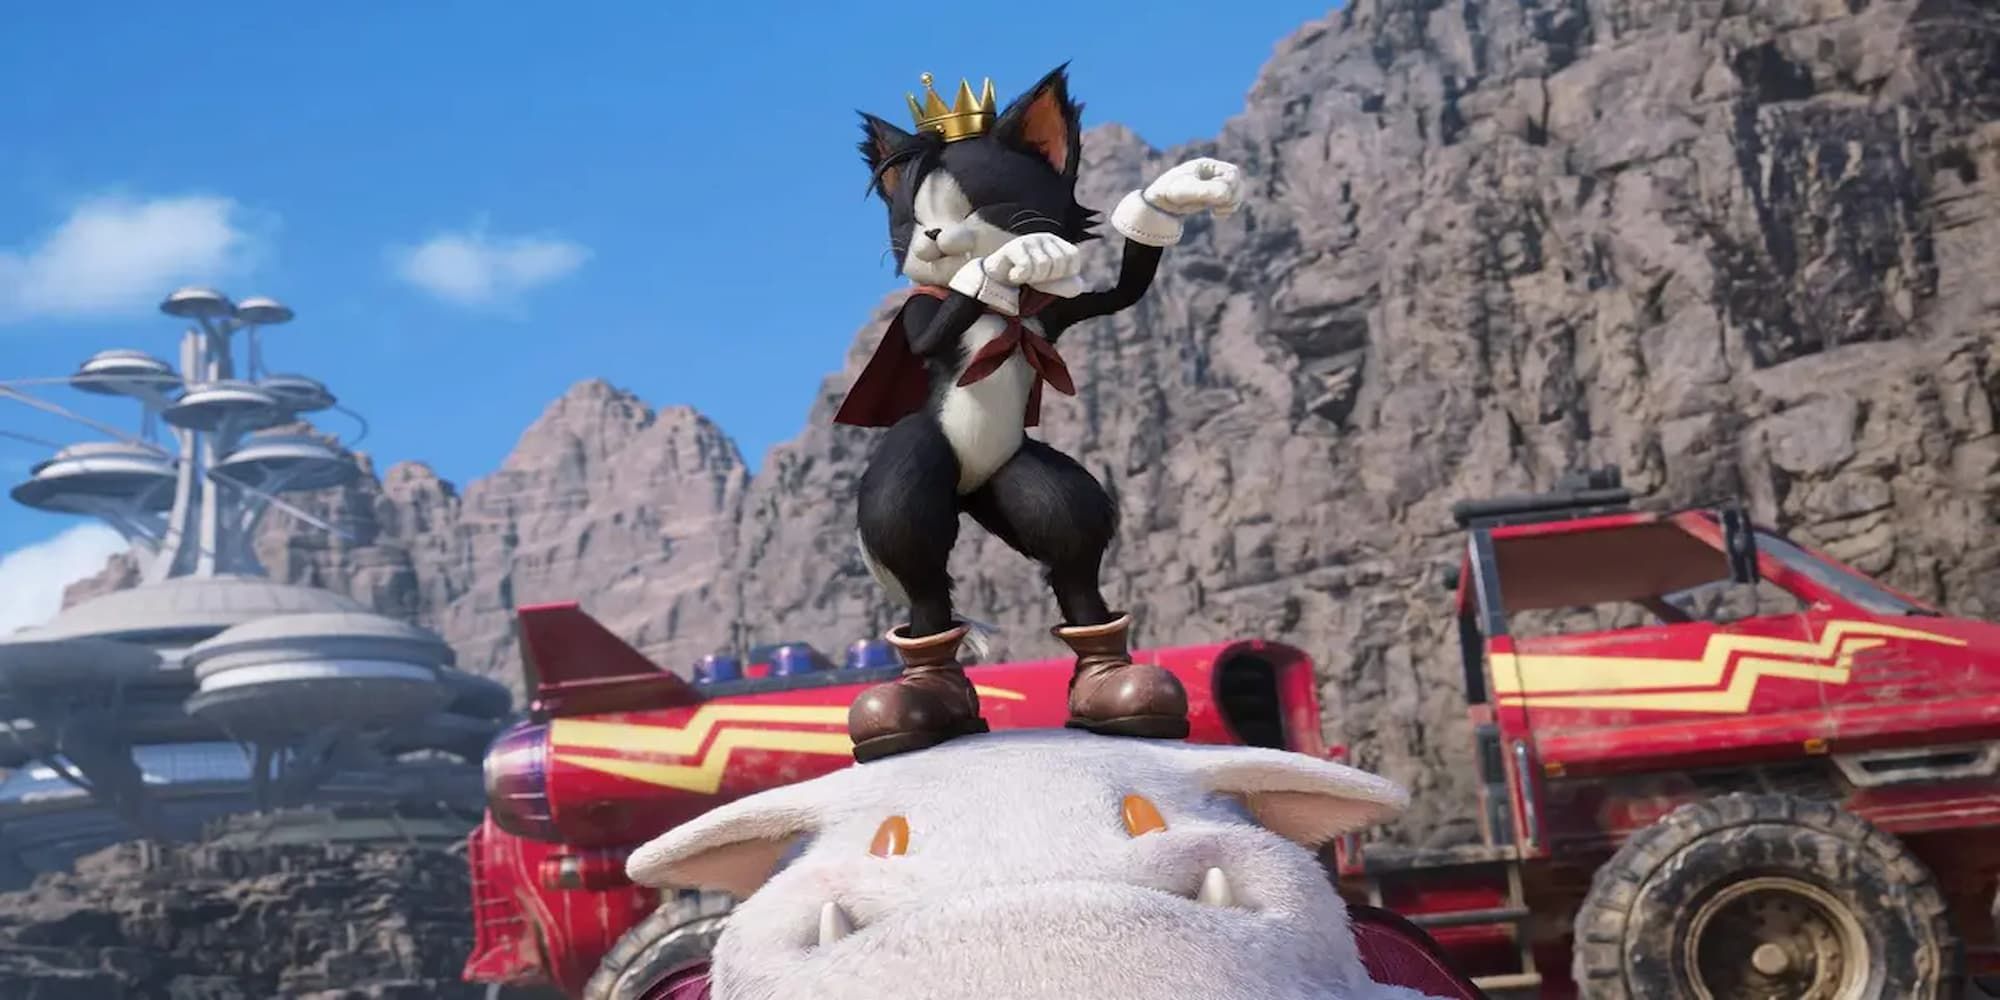 Cait Sith Standing On Top Of His Moogle